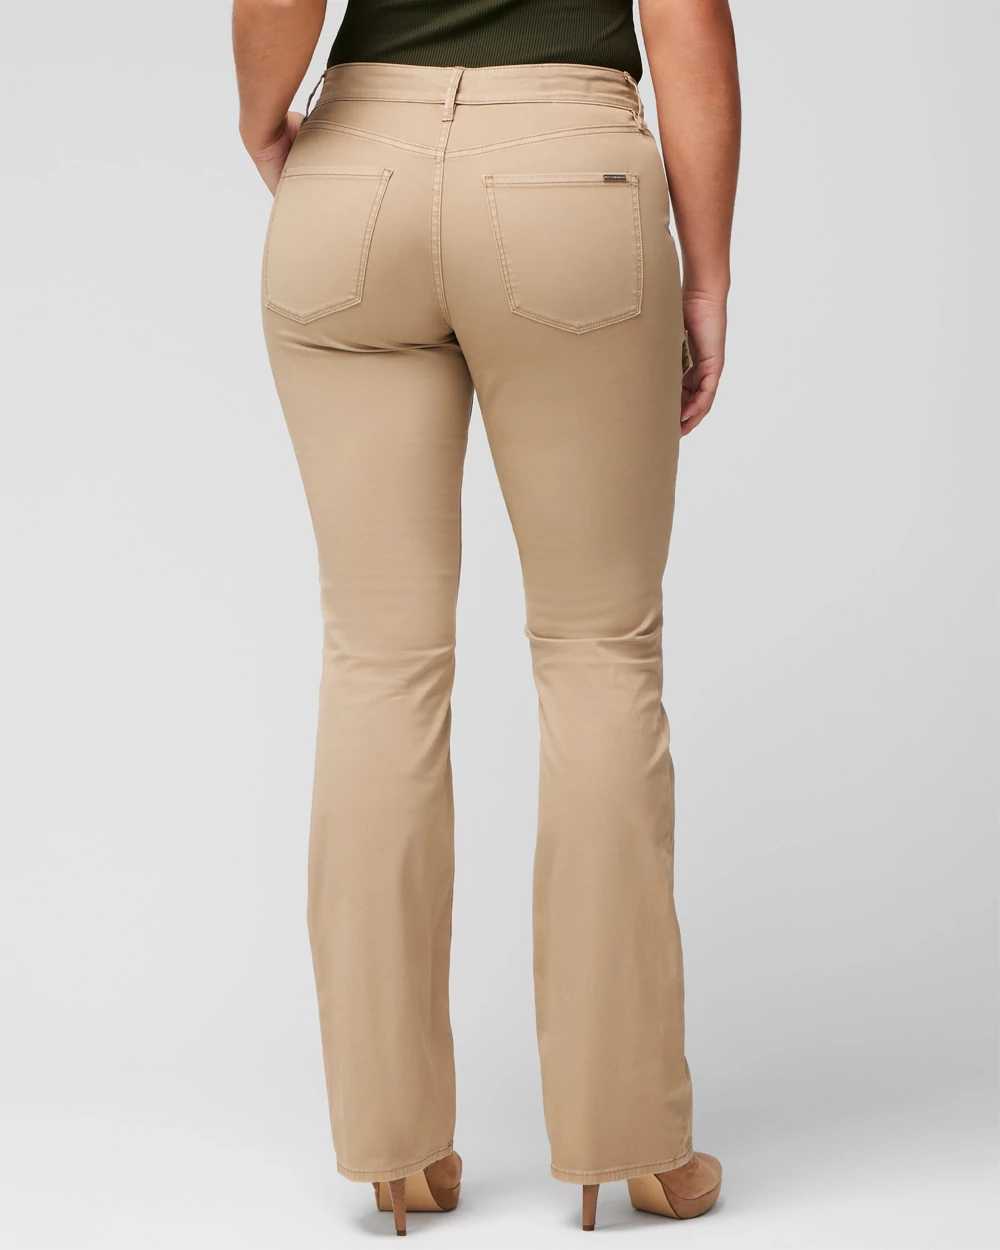 Curvy High Rise Pret Cargo Skinny Flare Jeans click to view larger image.